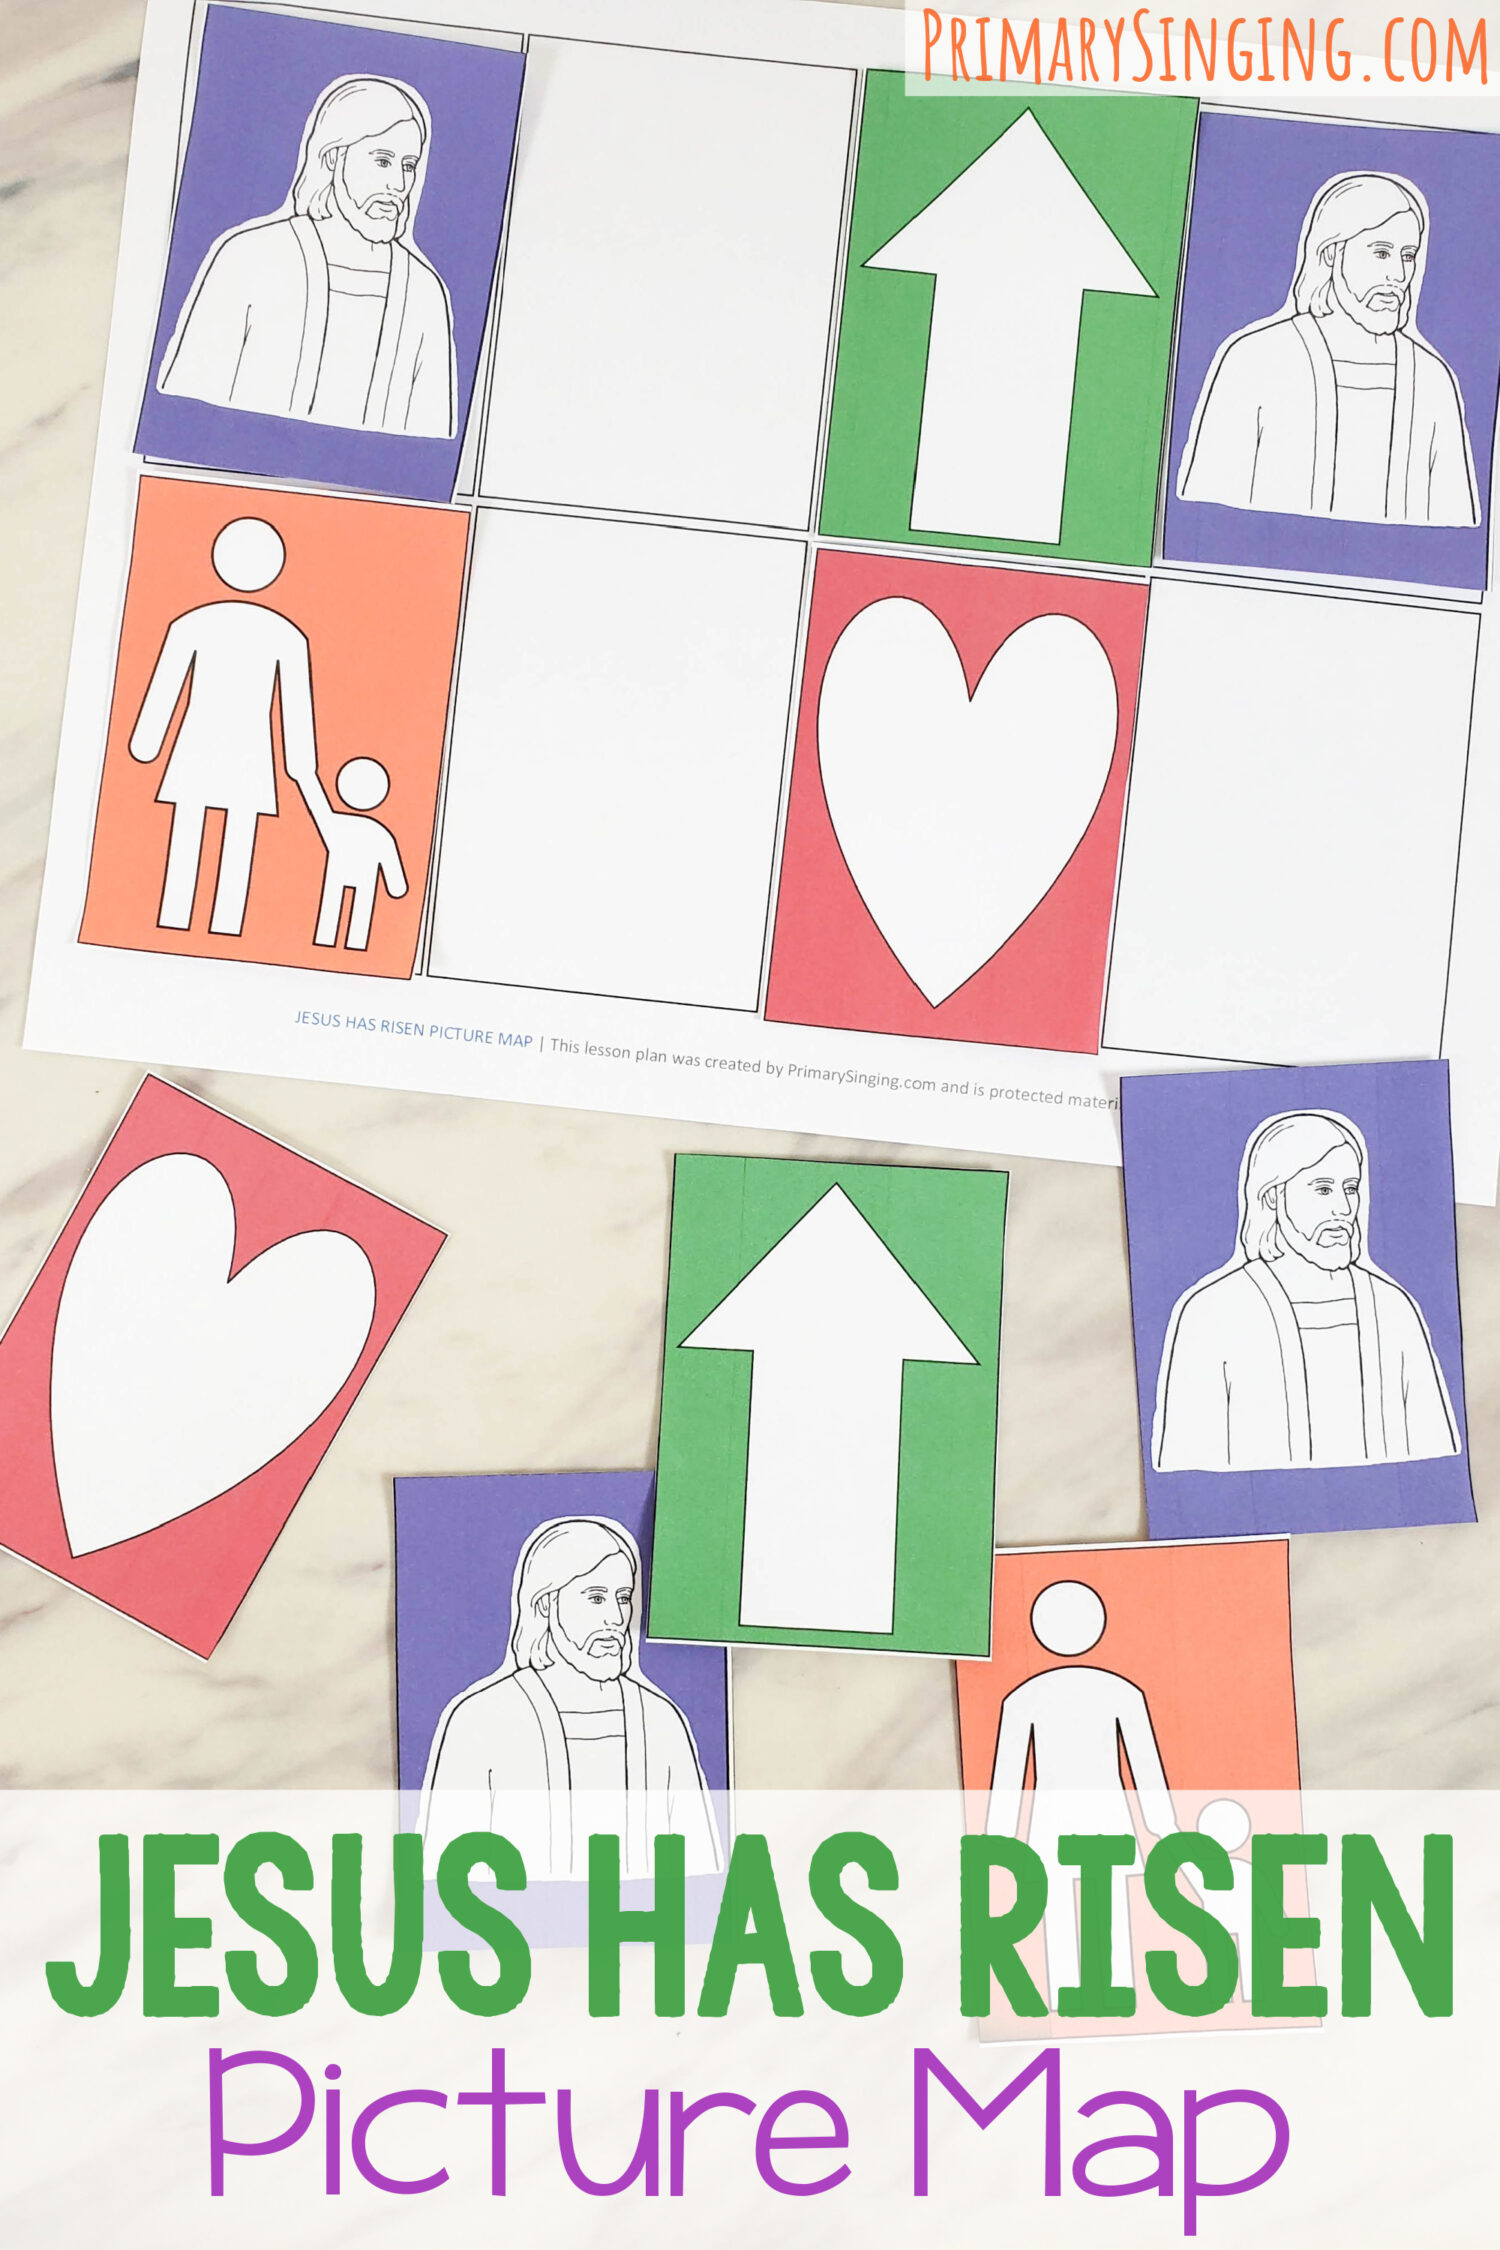 Jesus Has Risen Picture map fun interactive way to teach this song in singing time with lesson plan and printable helps for LDS Primary music leaders. Use this crack the code to have the kids place the colors or icons in the blanks representing each word of the song lyrics!